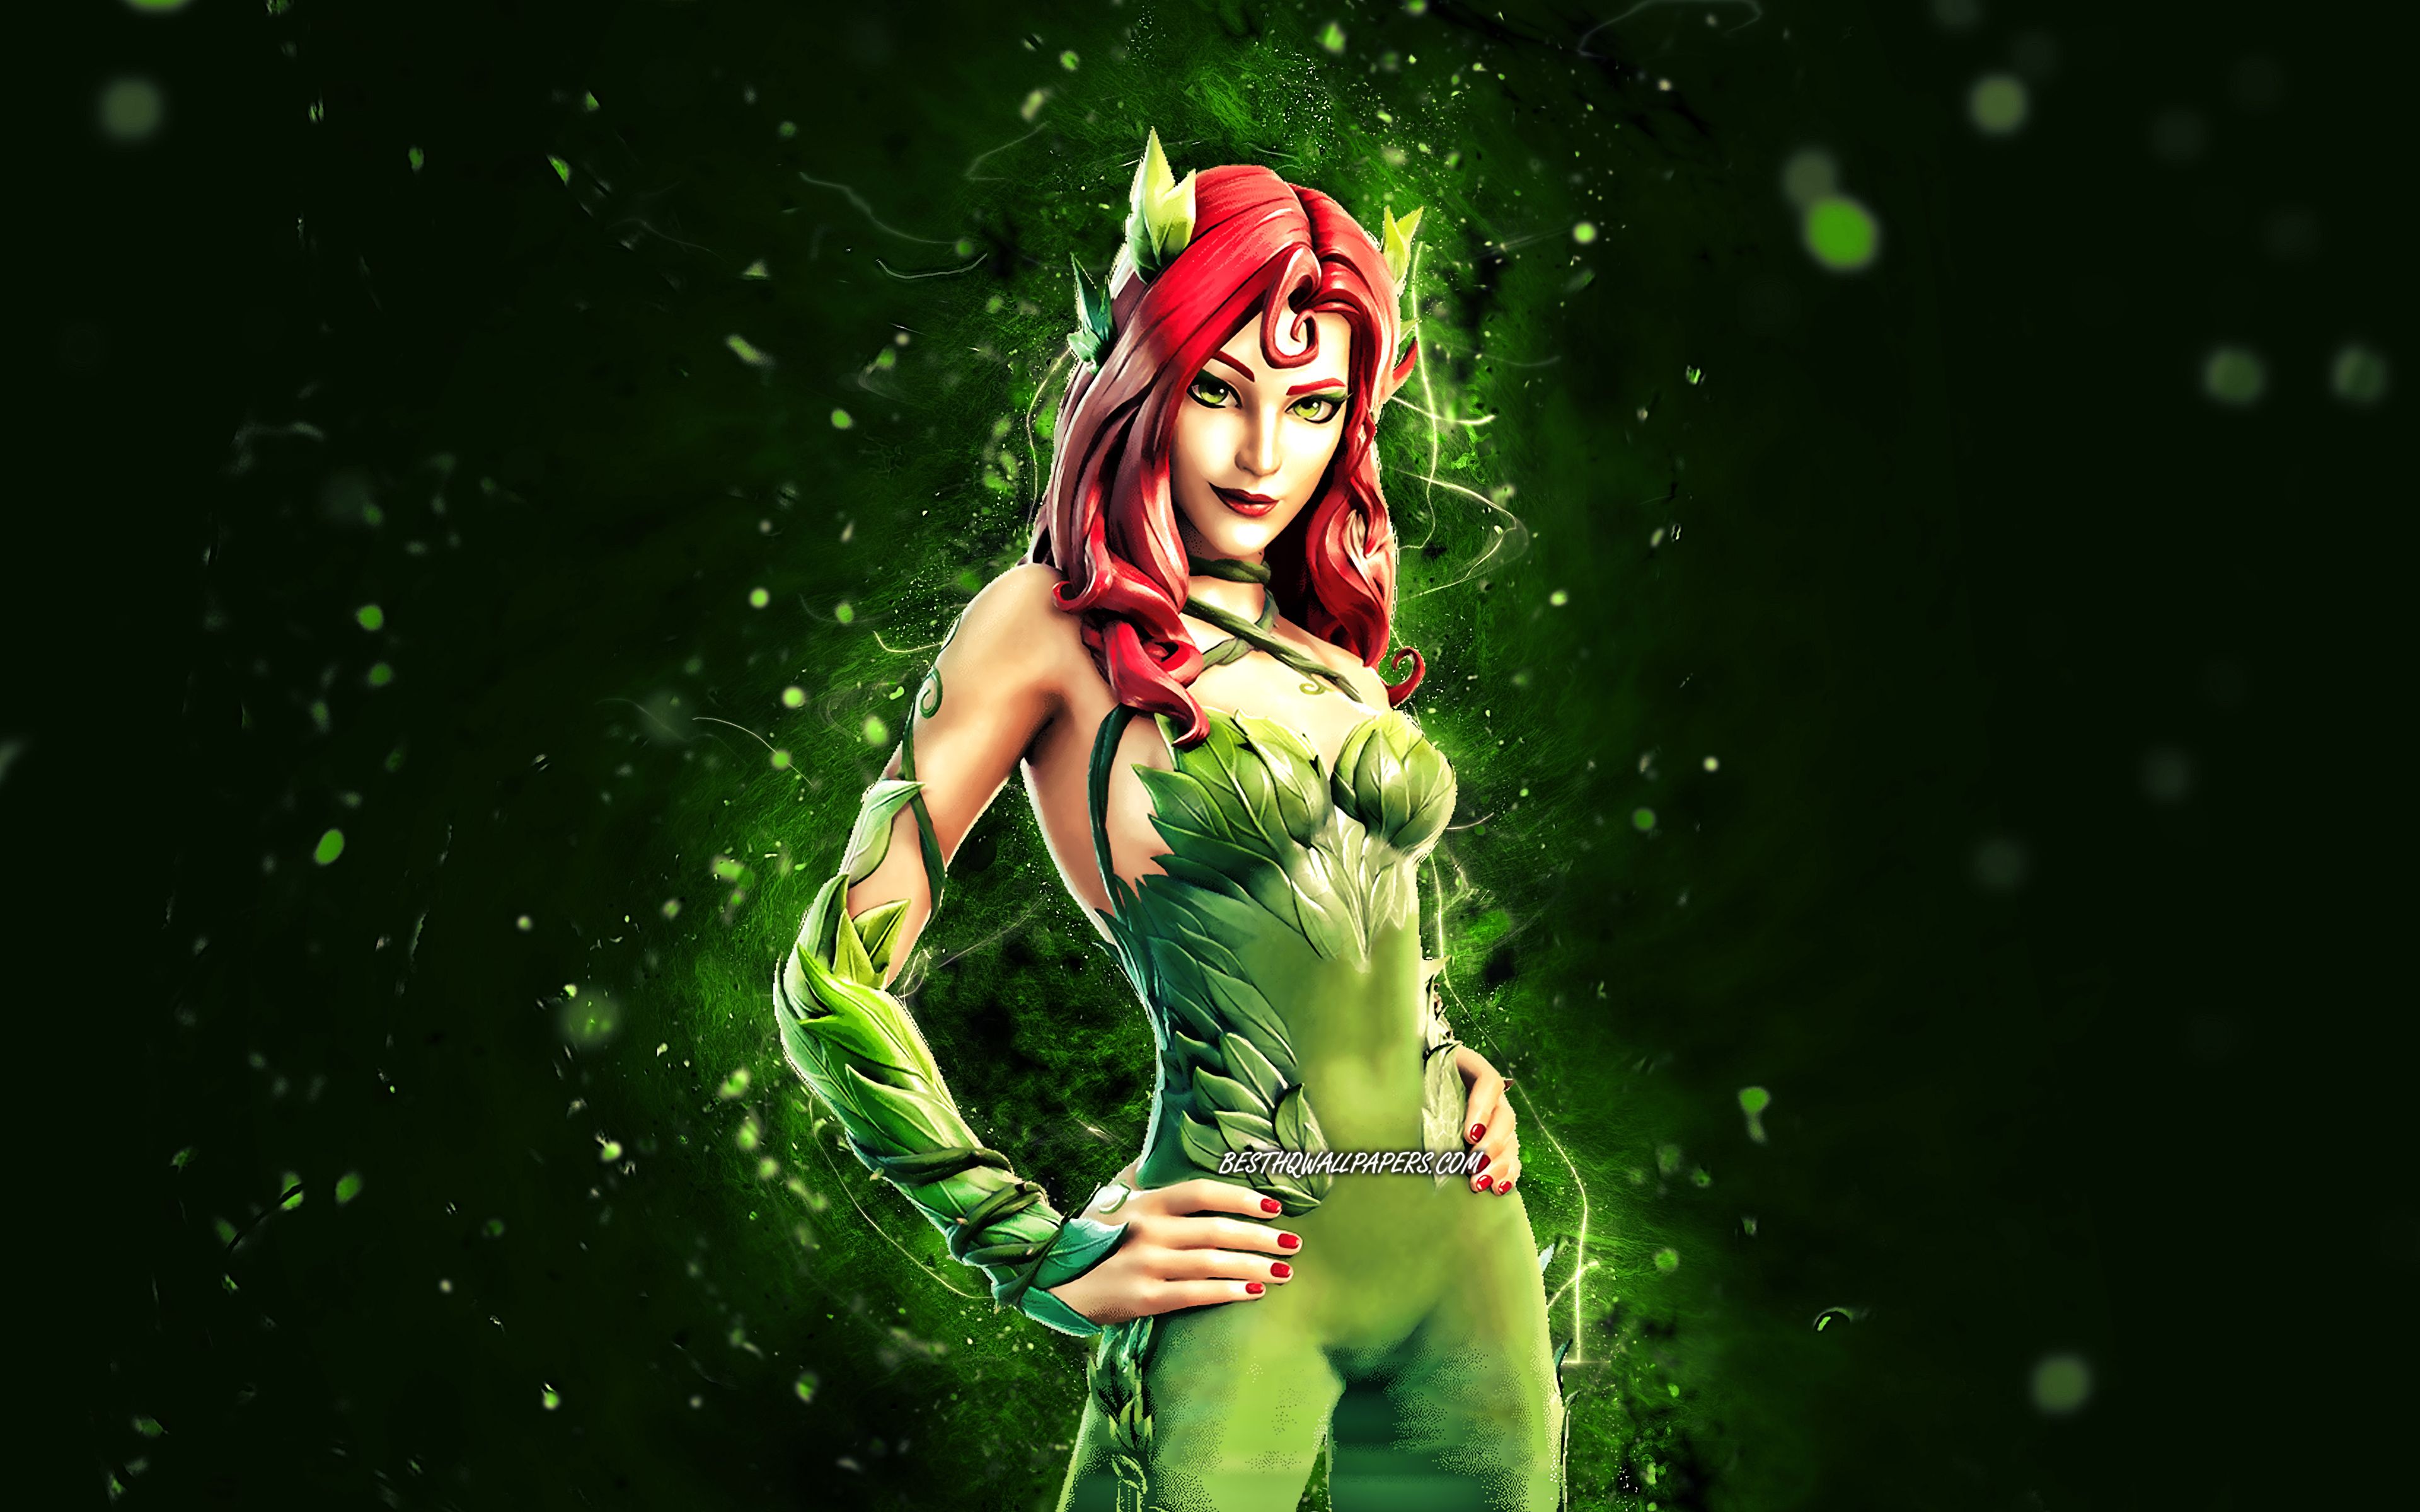 Download wallpaper Human Poison Ivy, 4k, green neon lights, Fortnite Battle Royale, Fortnite characters, Human Poison Ivy Skin, Fortnite, Human Poison Ivy Fortnite for desktop with resolution 3840x2400. High Quality HD picture